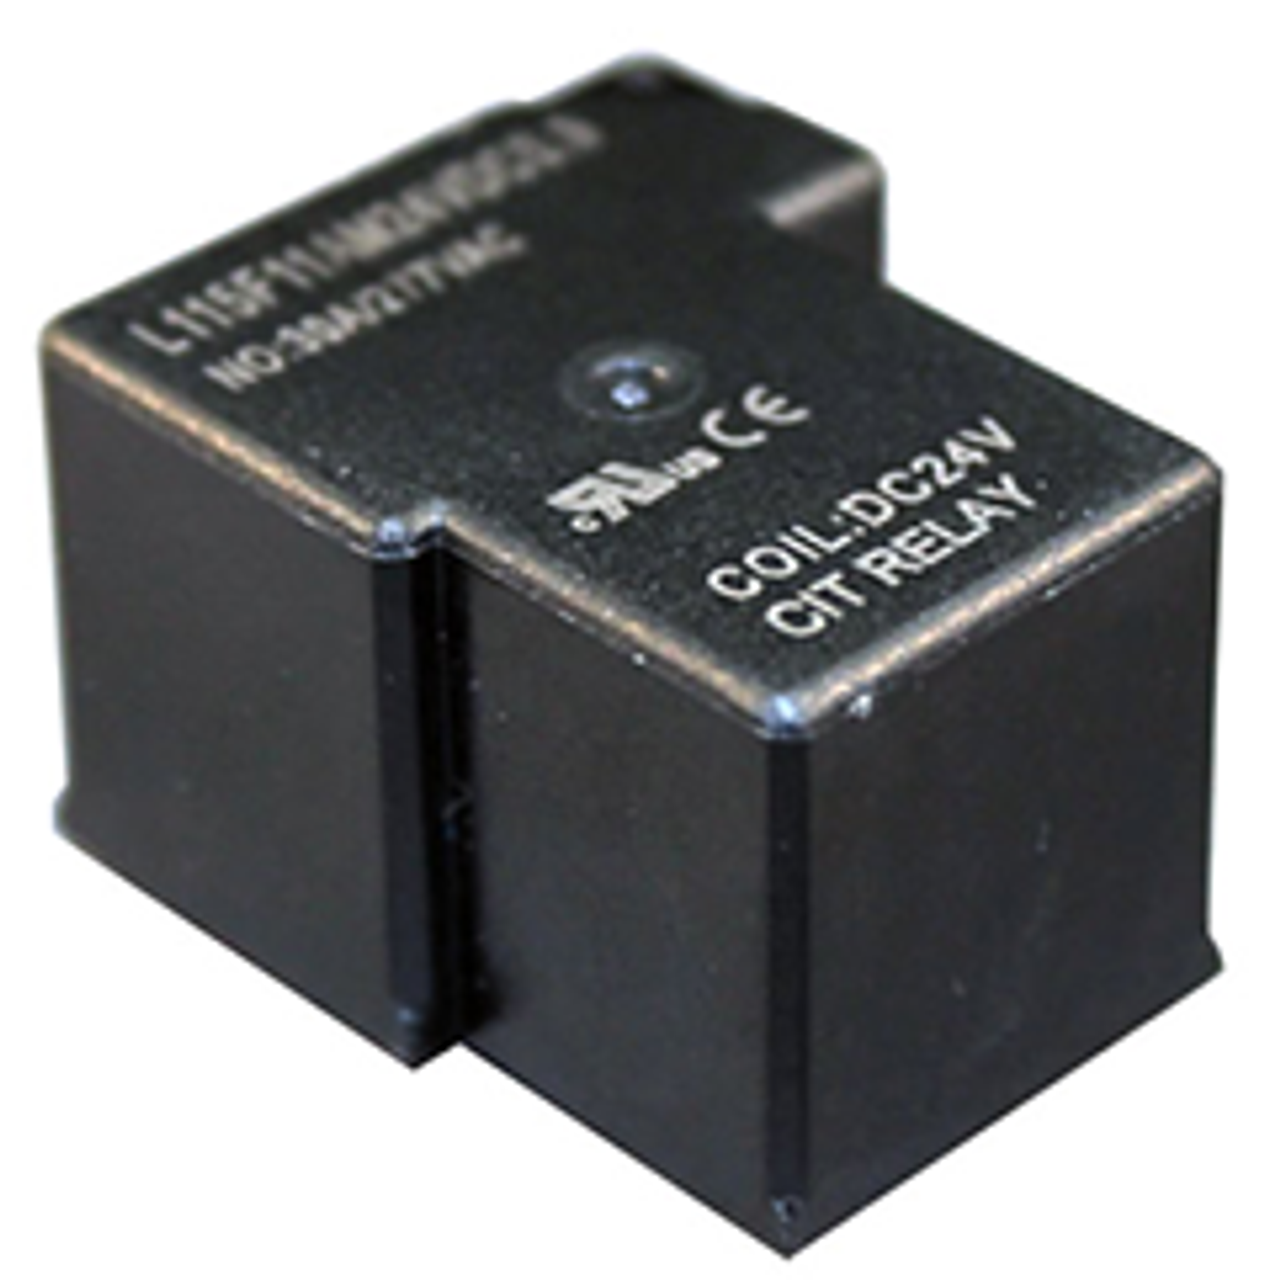 CIT Relay and Switch L115F11AK5VDCS.9 Latching Relays